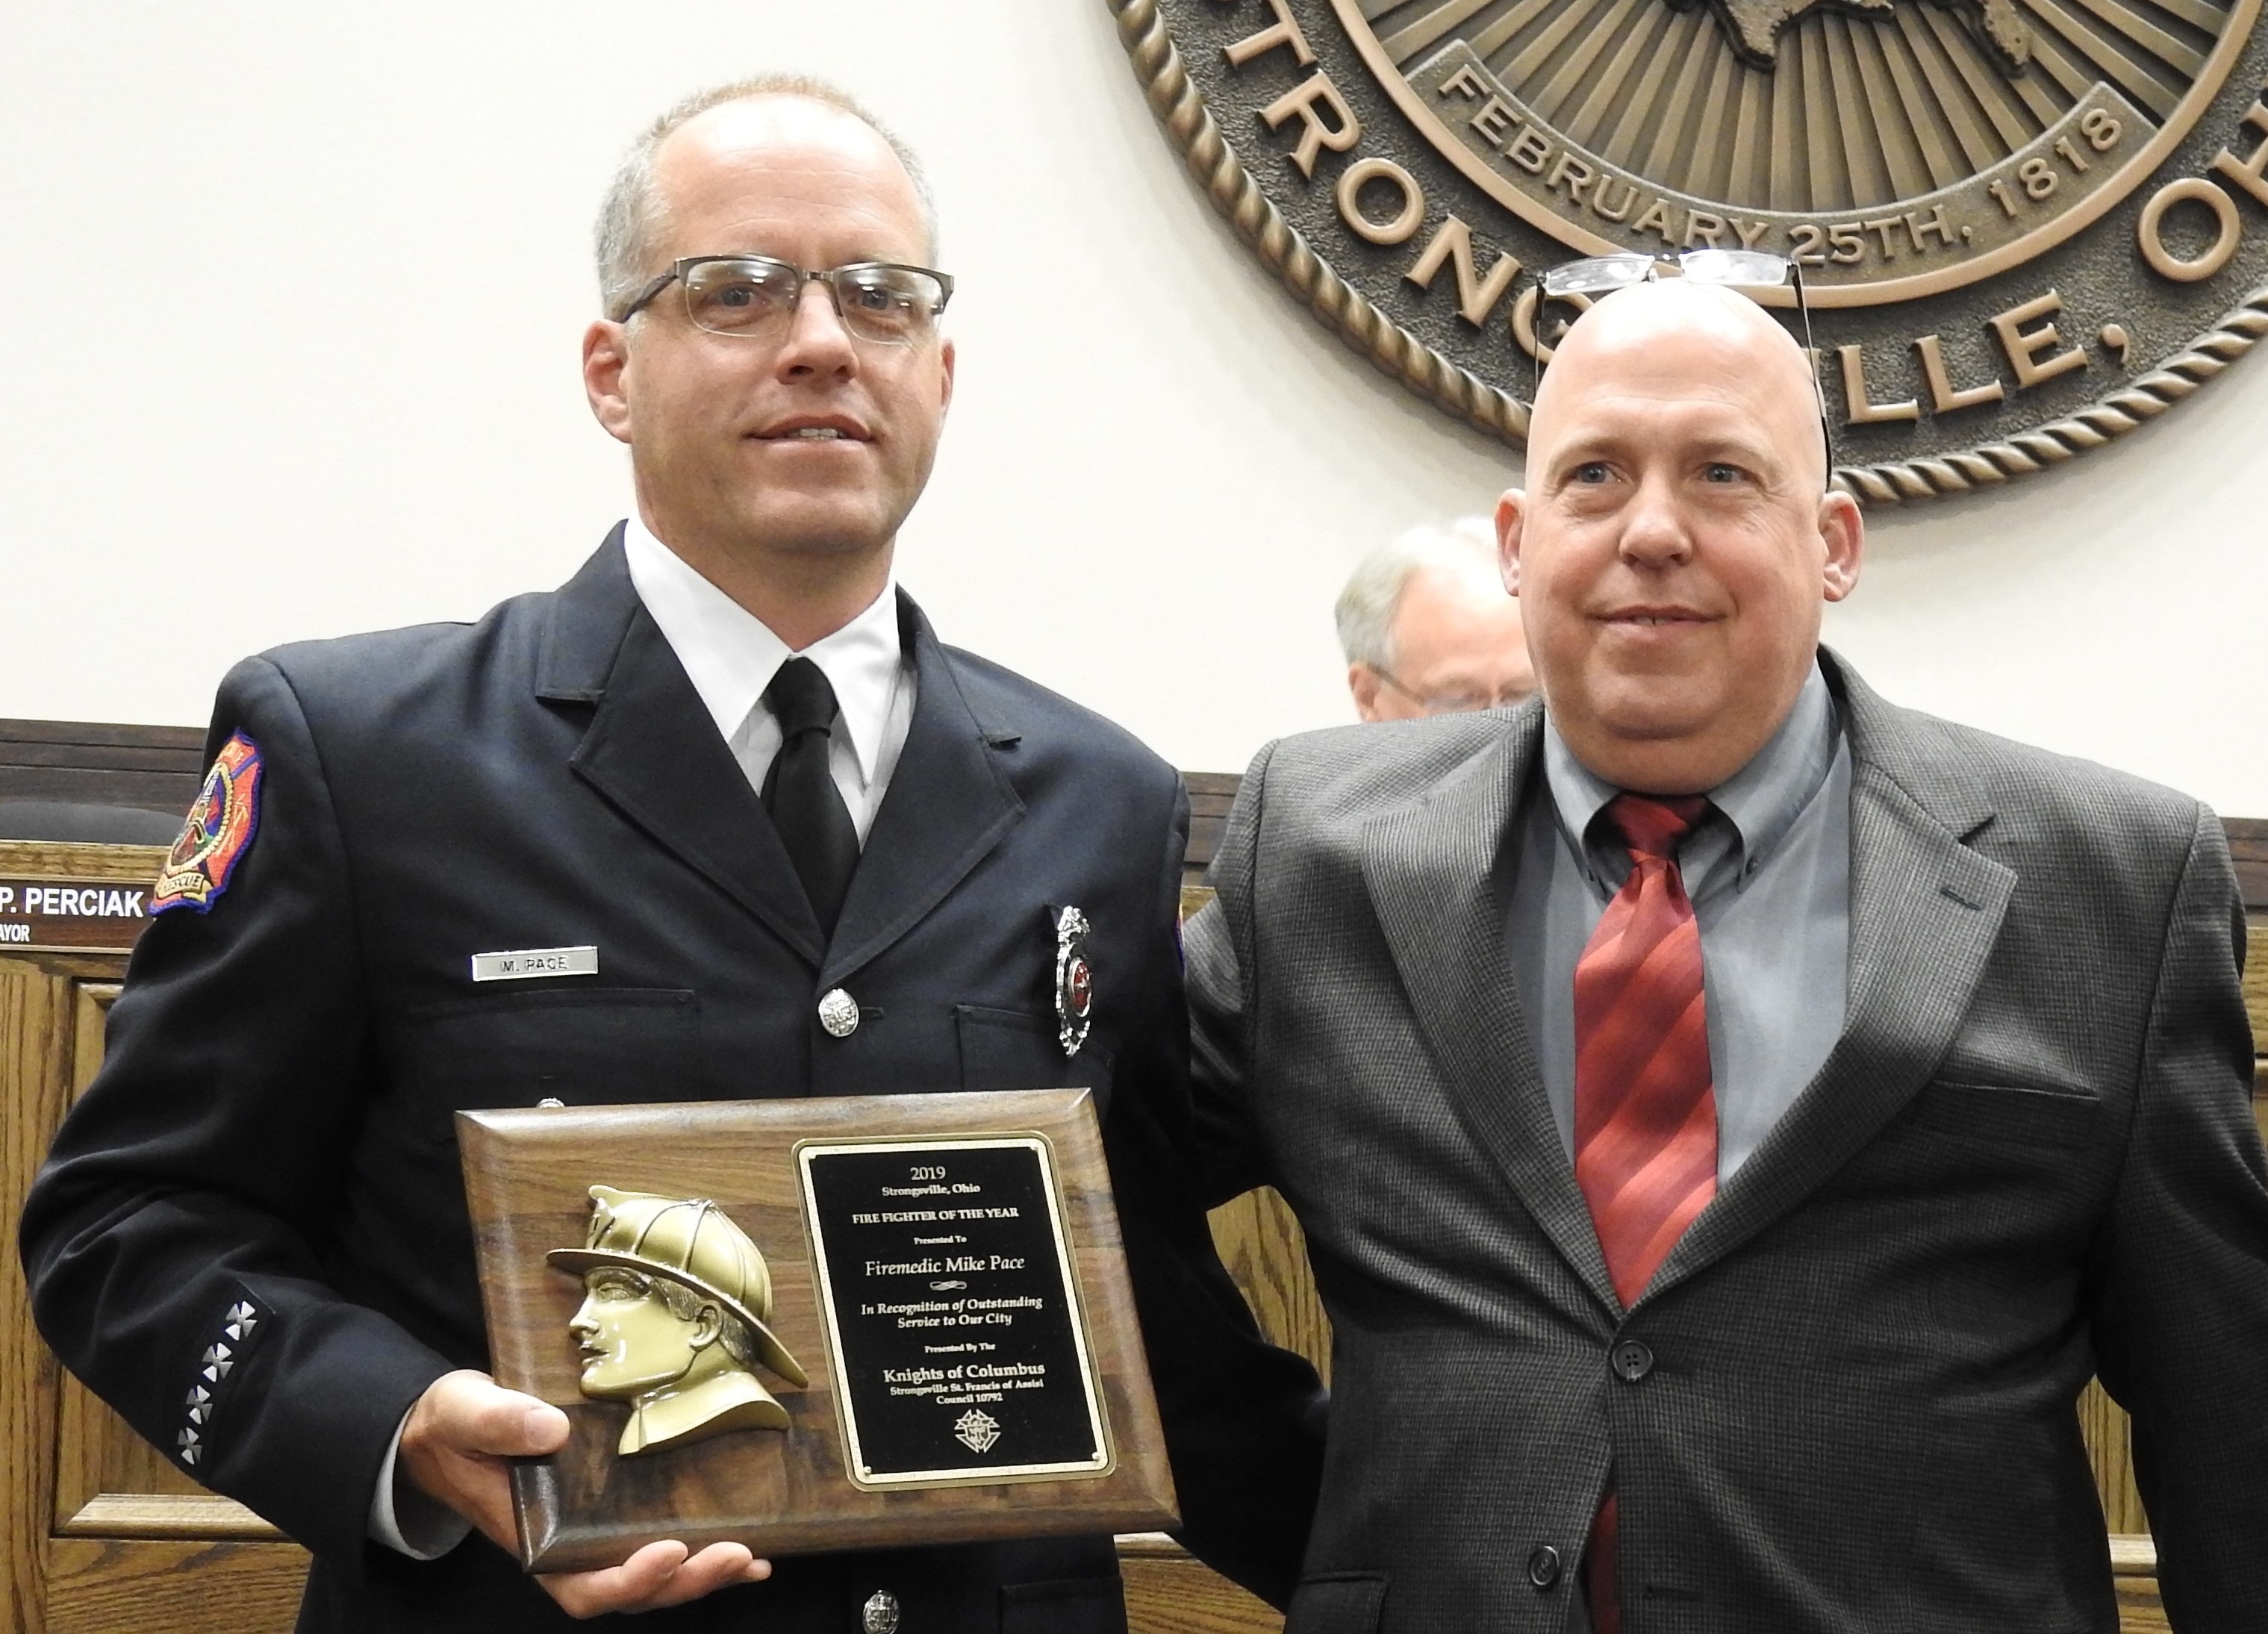 Pace is Firefighter of the Year